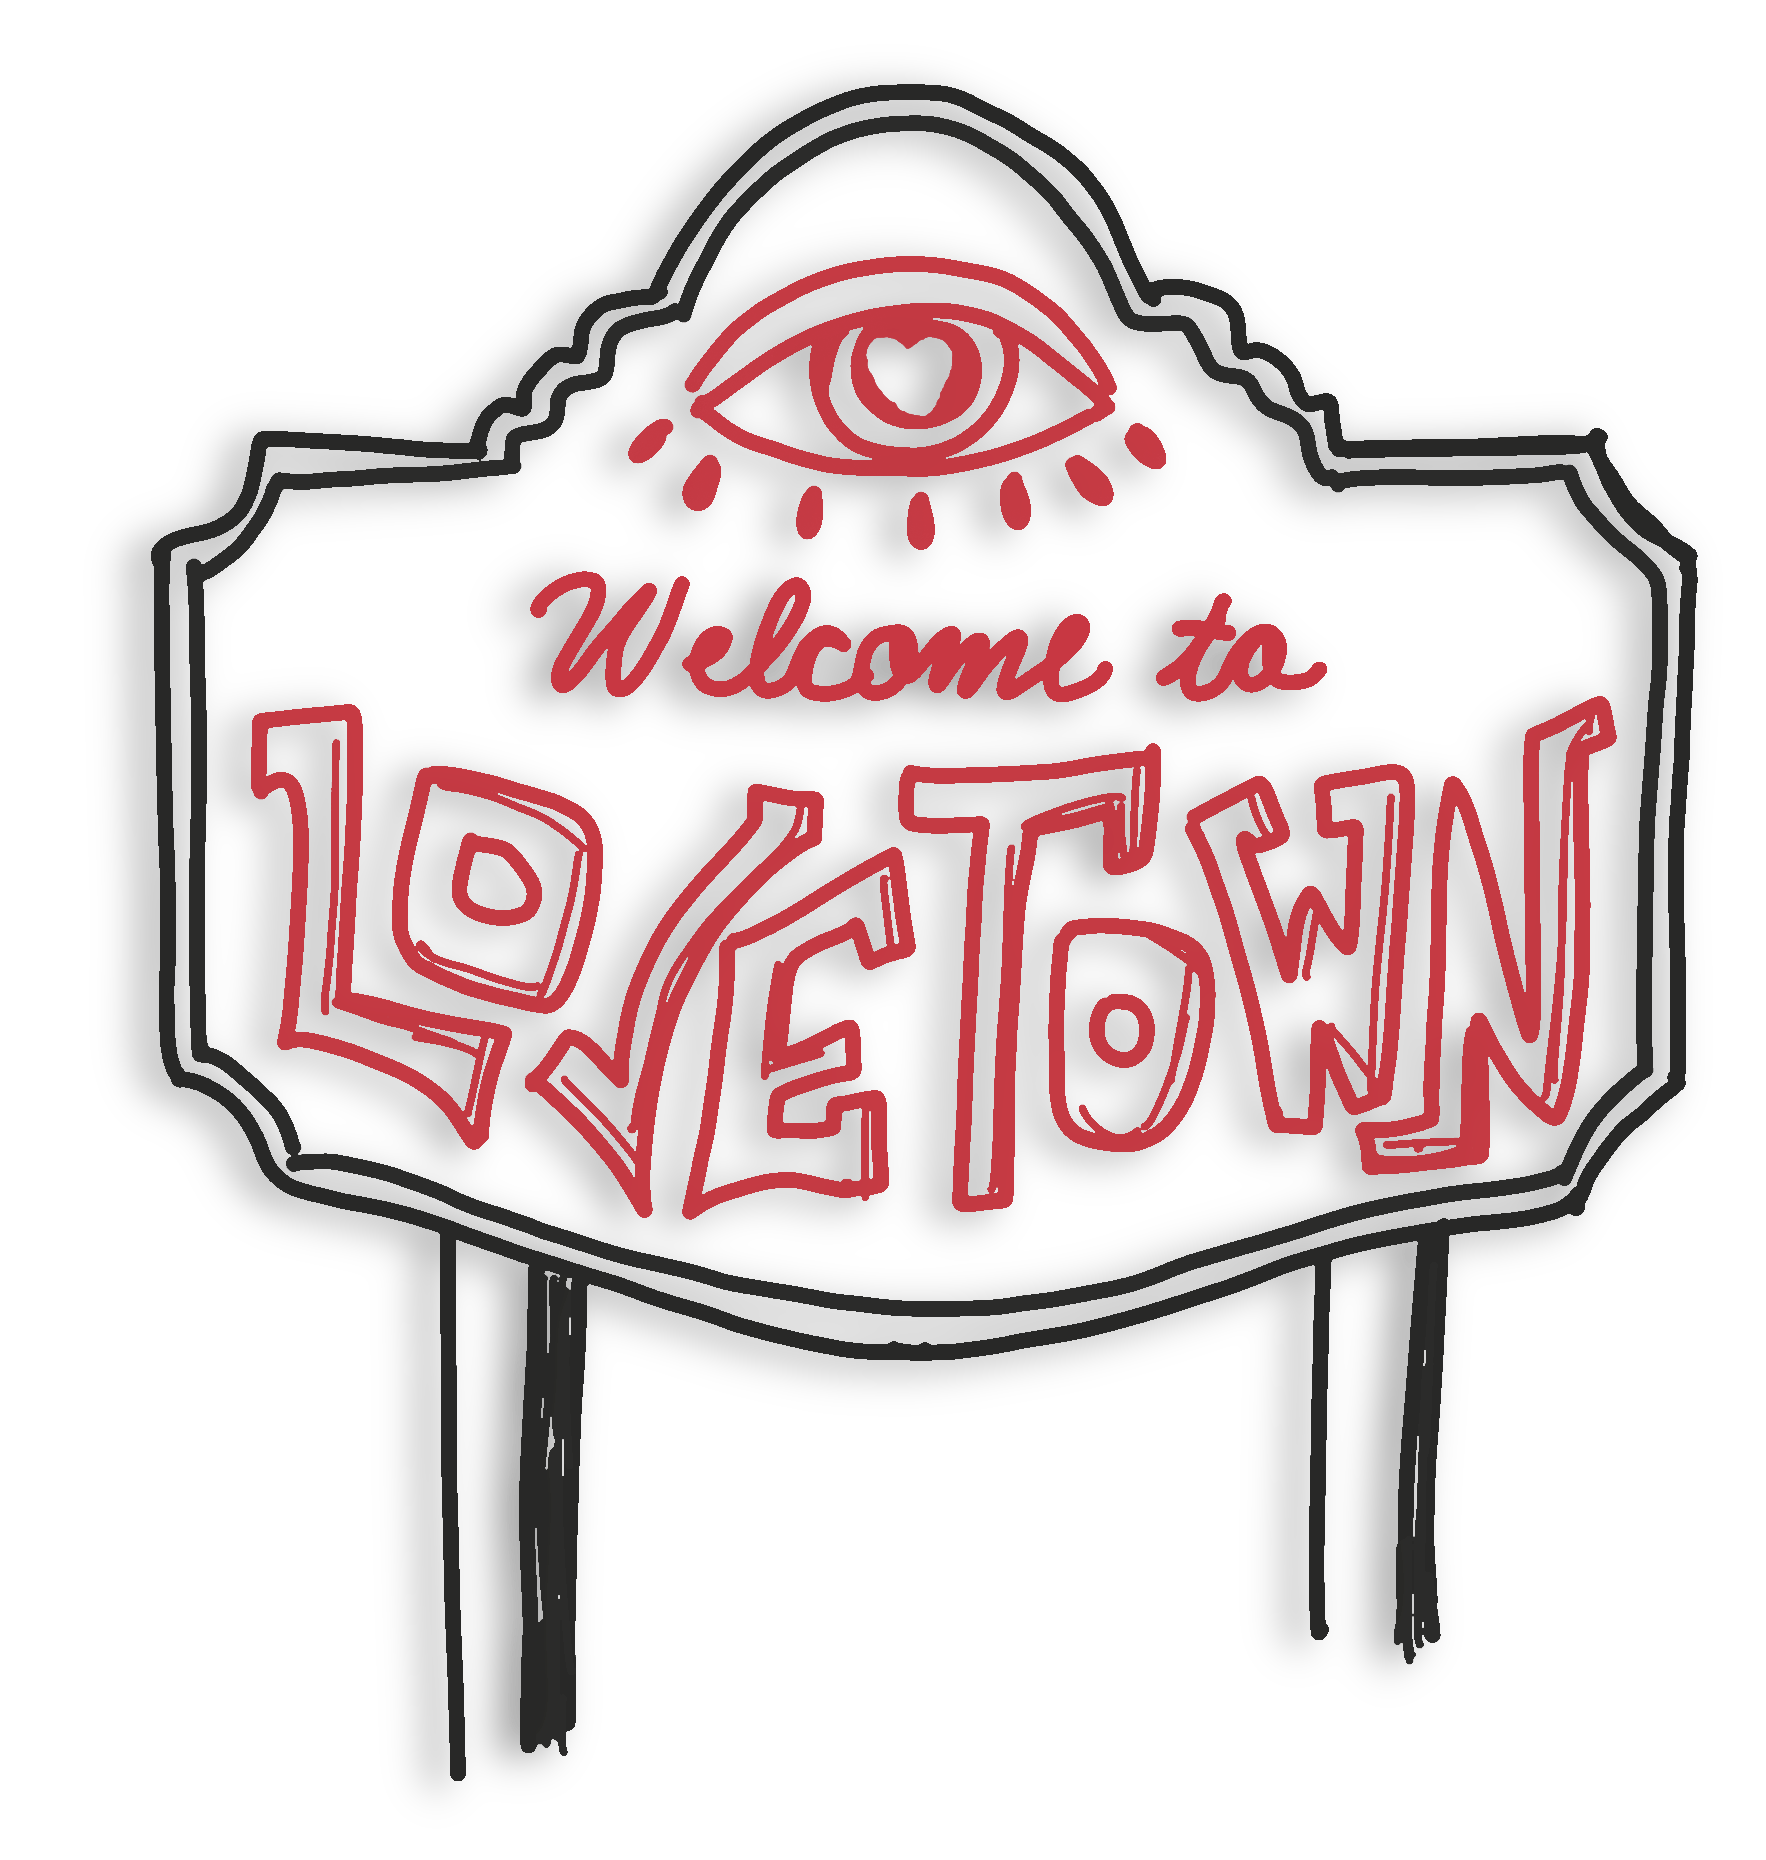 A Sign Reading WELCOME TO LOVETOWN